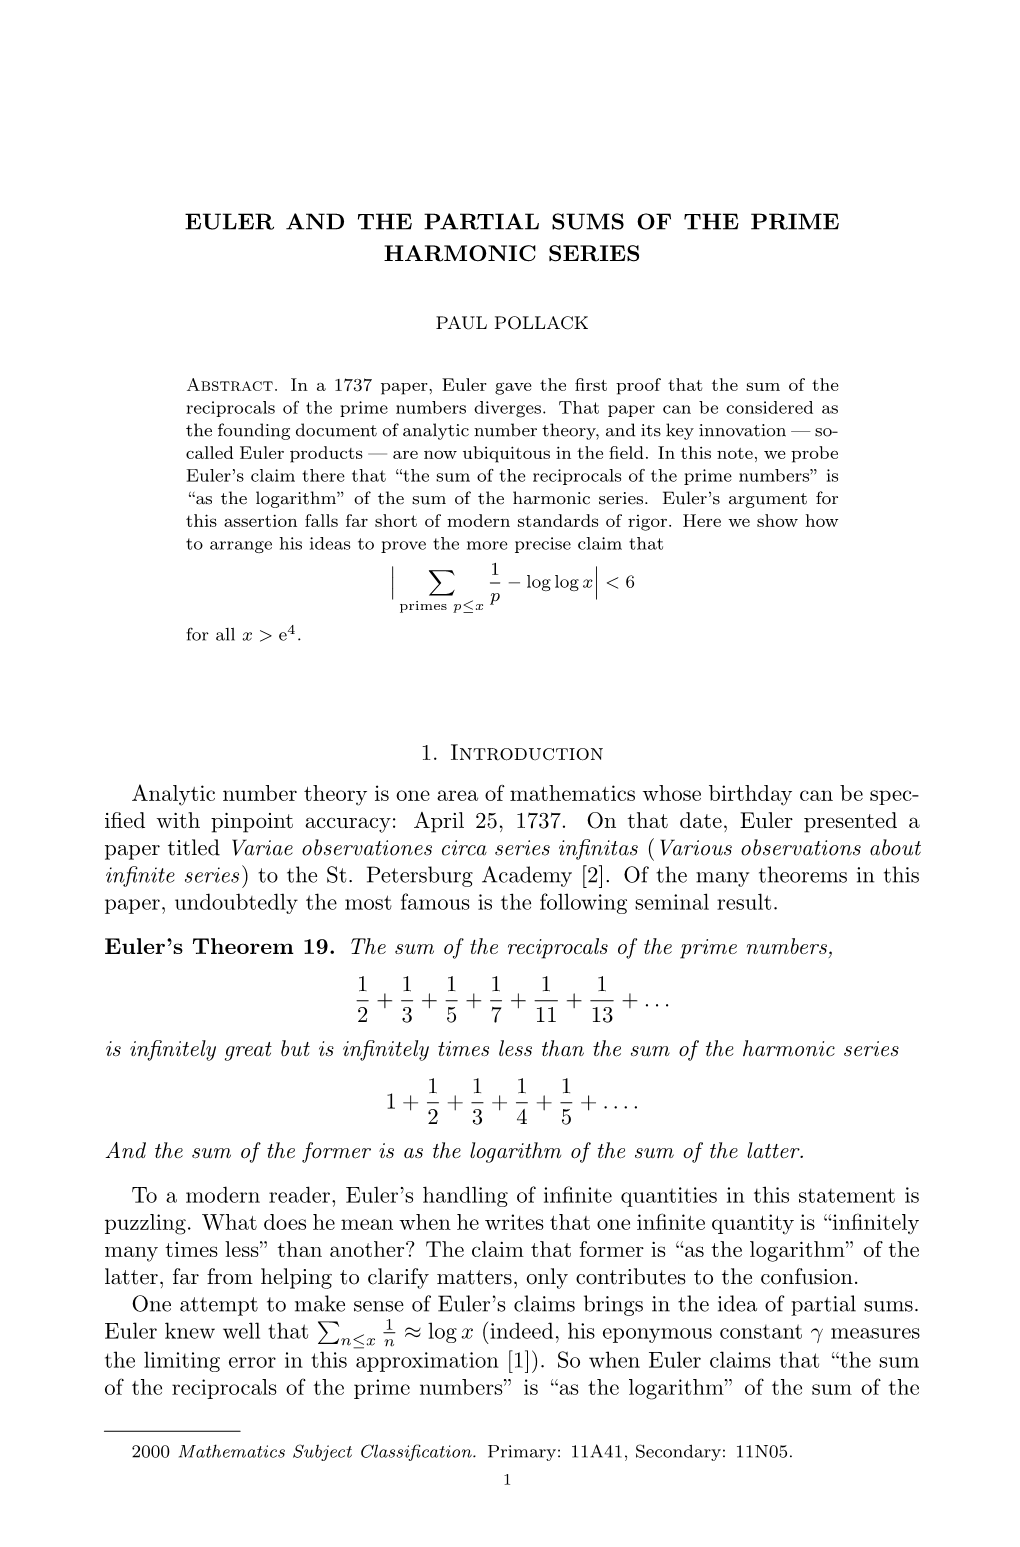 EULER and the PARTIAL SUMS of the PRIME HARMONIC SERIES 1. Introduction Analytic Number Theory Is One Area of Mathematics Whose